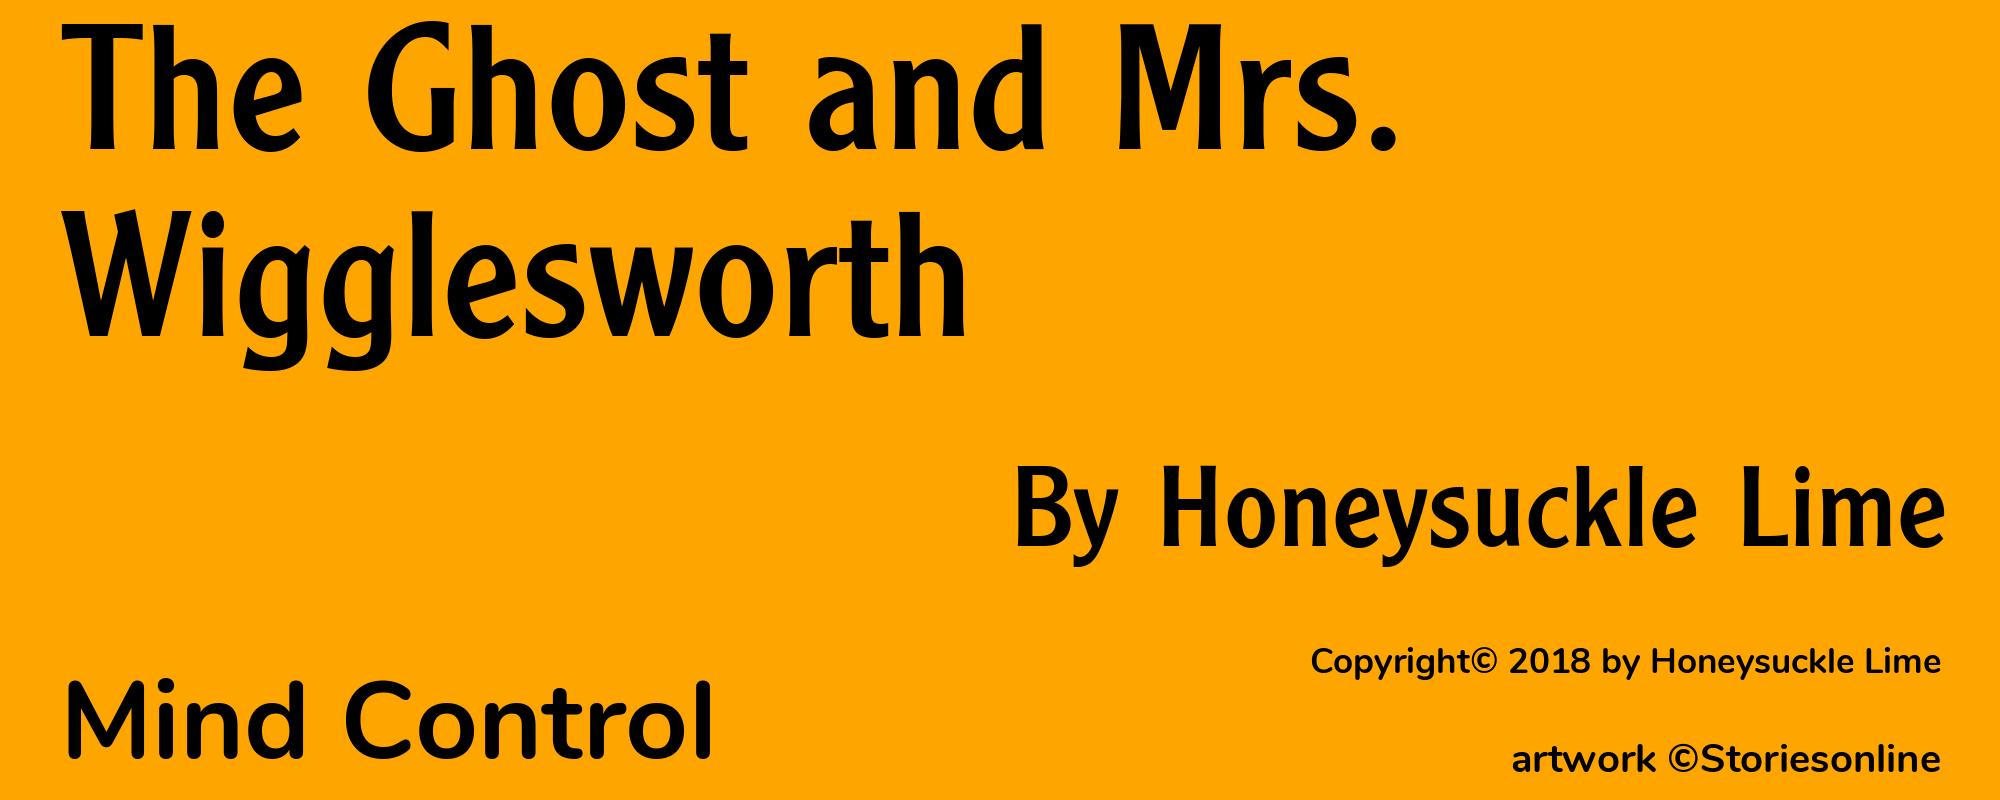 The Ghost and Mrs. Wigglesworth - Cover